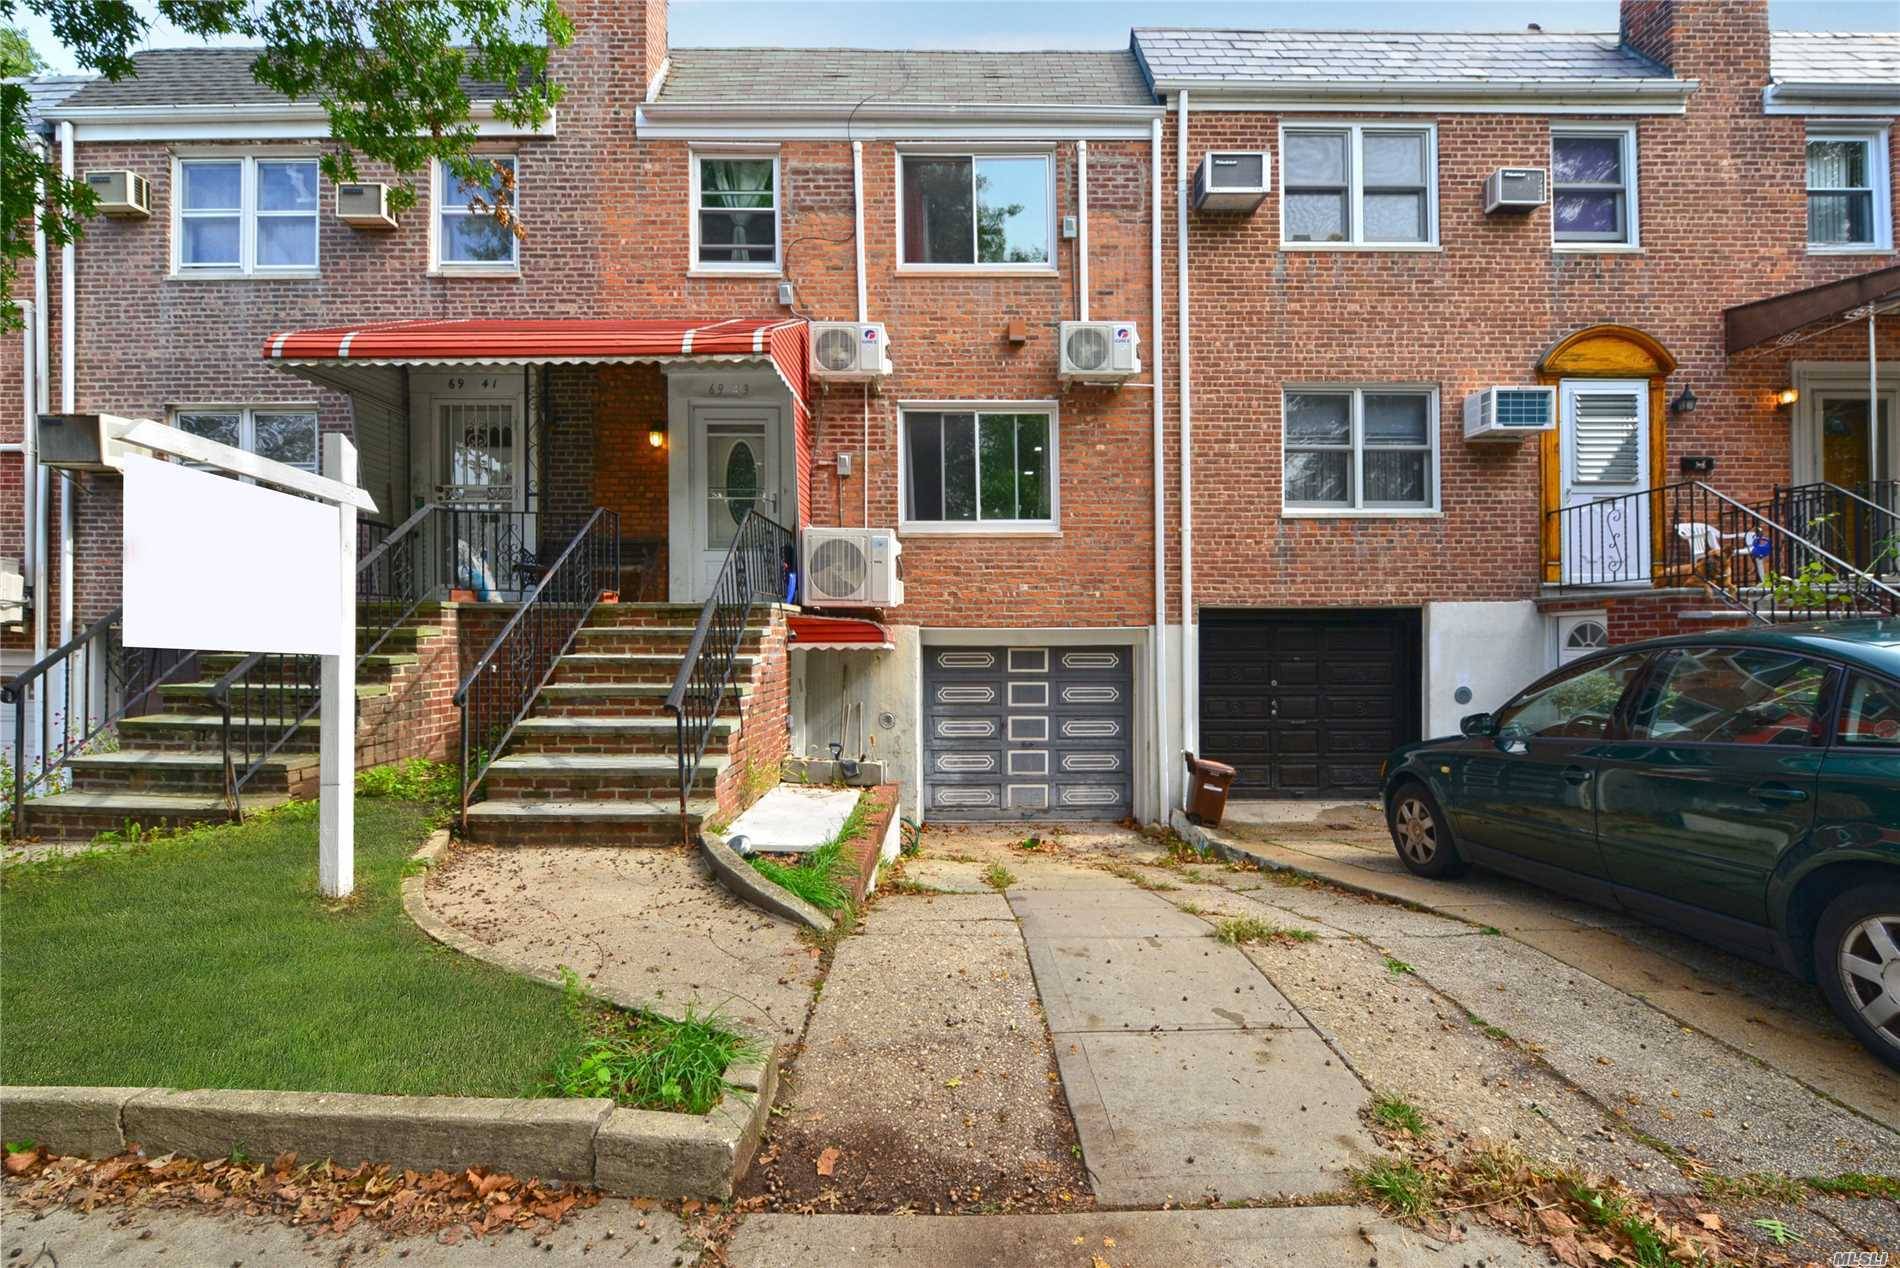 Step Into This Gorgeous Renovated Home Located In The Heart Of Fresh Meadows.